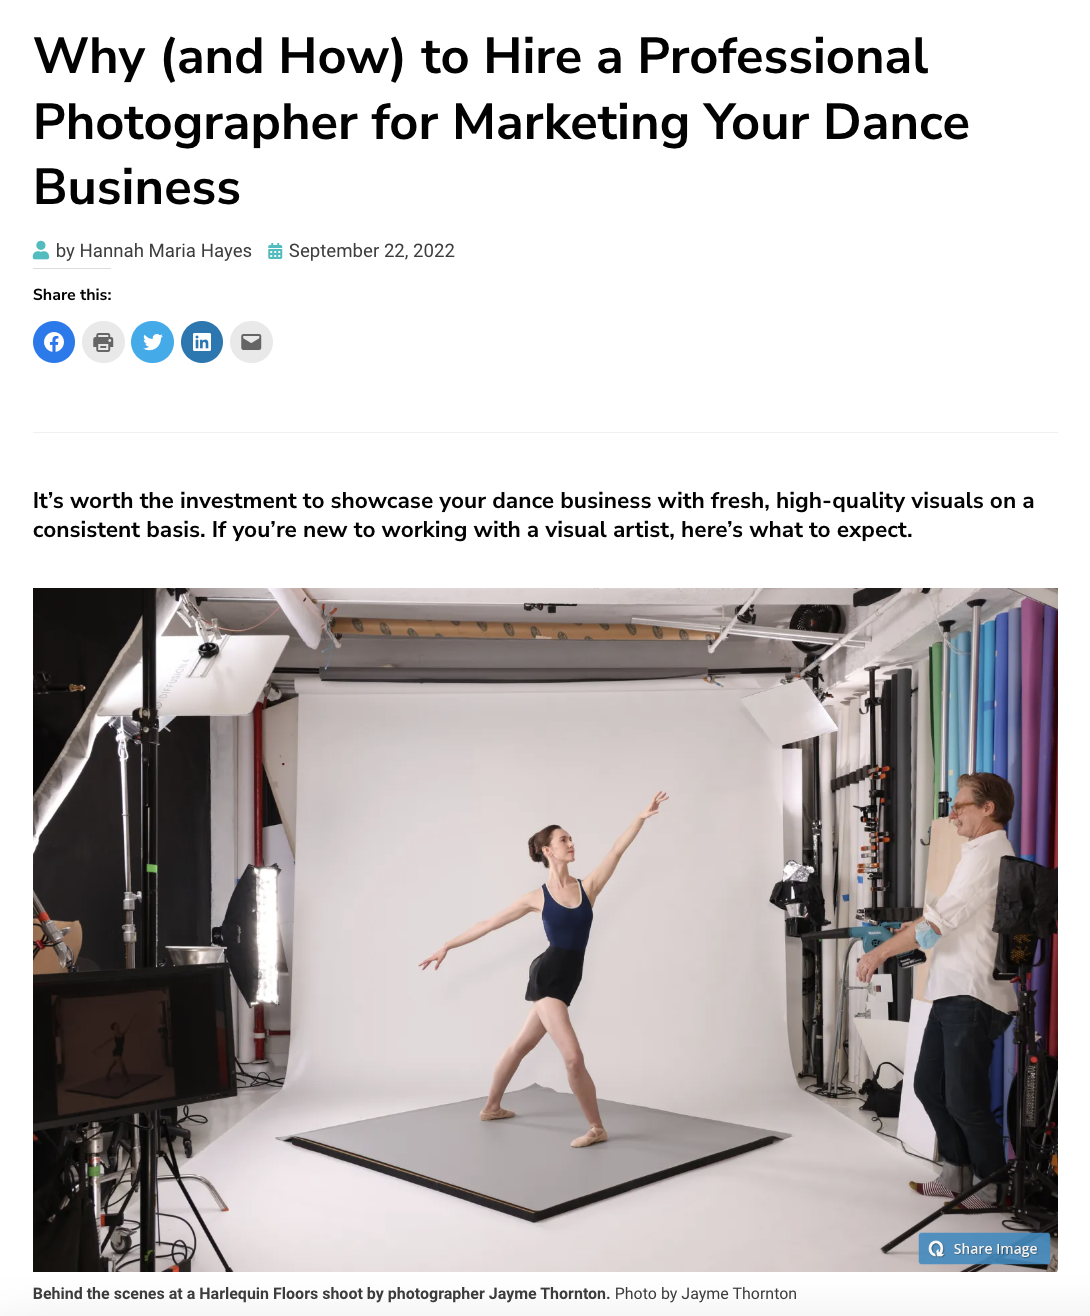 Why (and How) to Hire a Professional Photographer for Marketing Your Dance Business